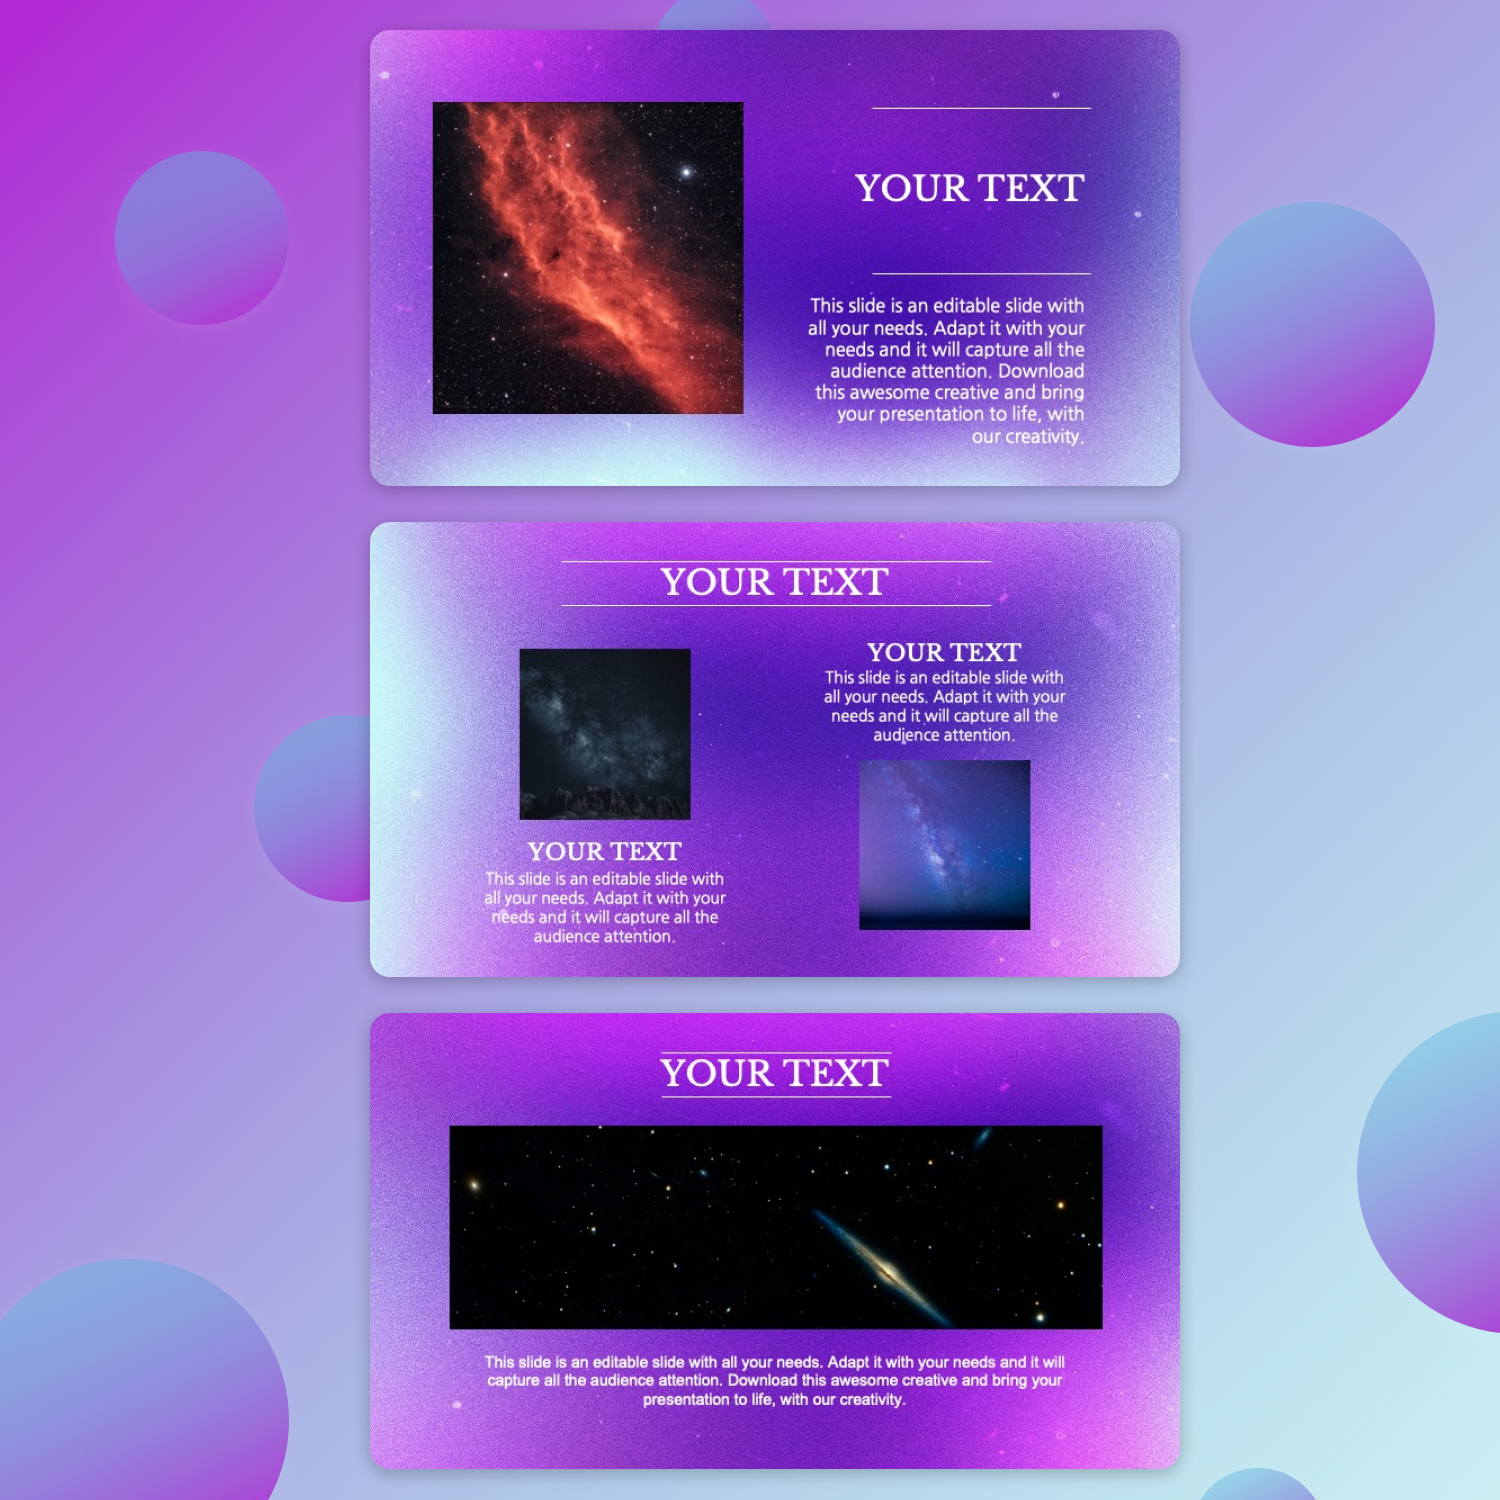 A preview of a page of slides with various space pictures.